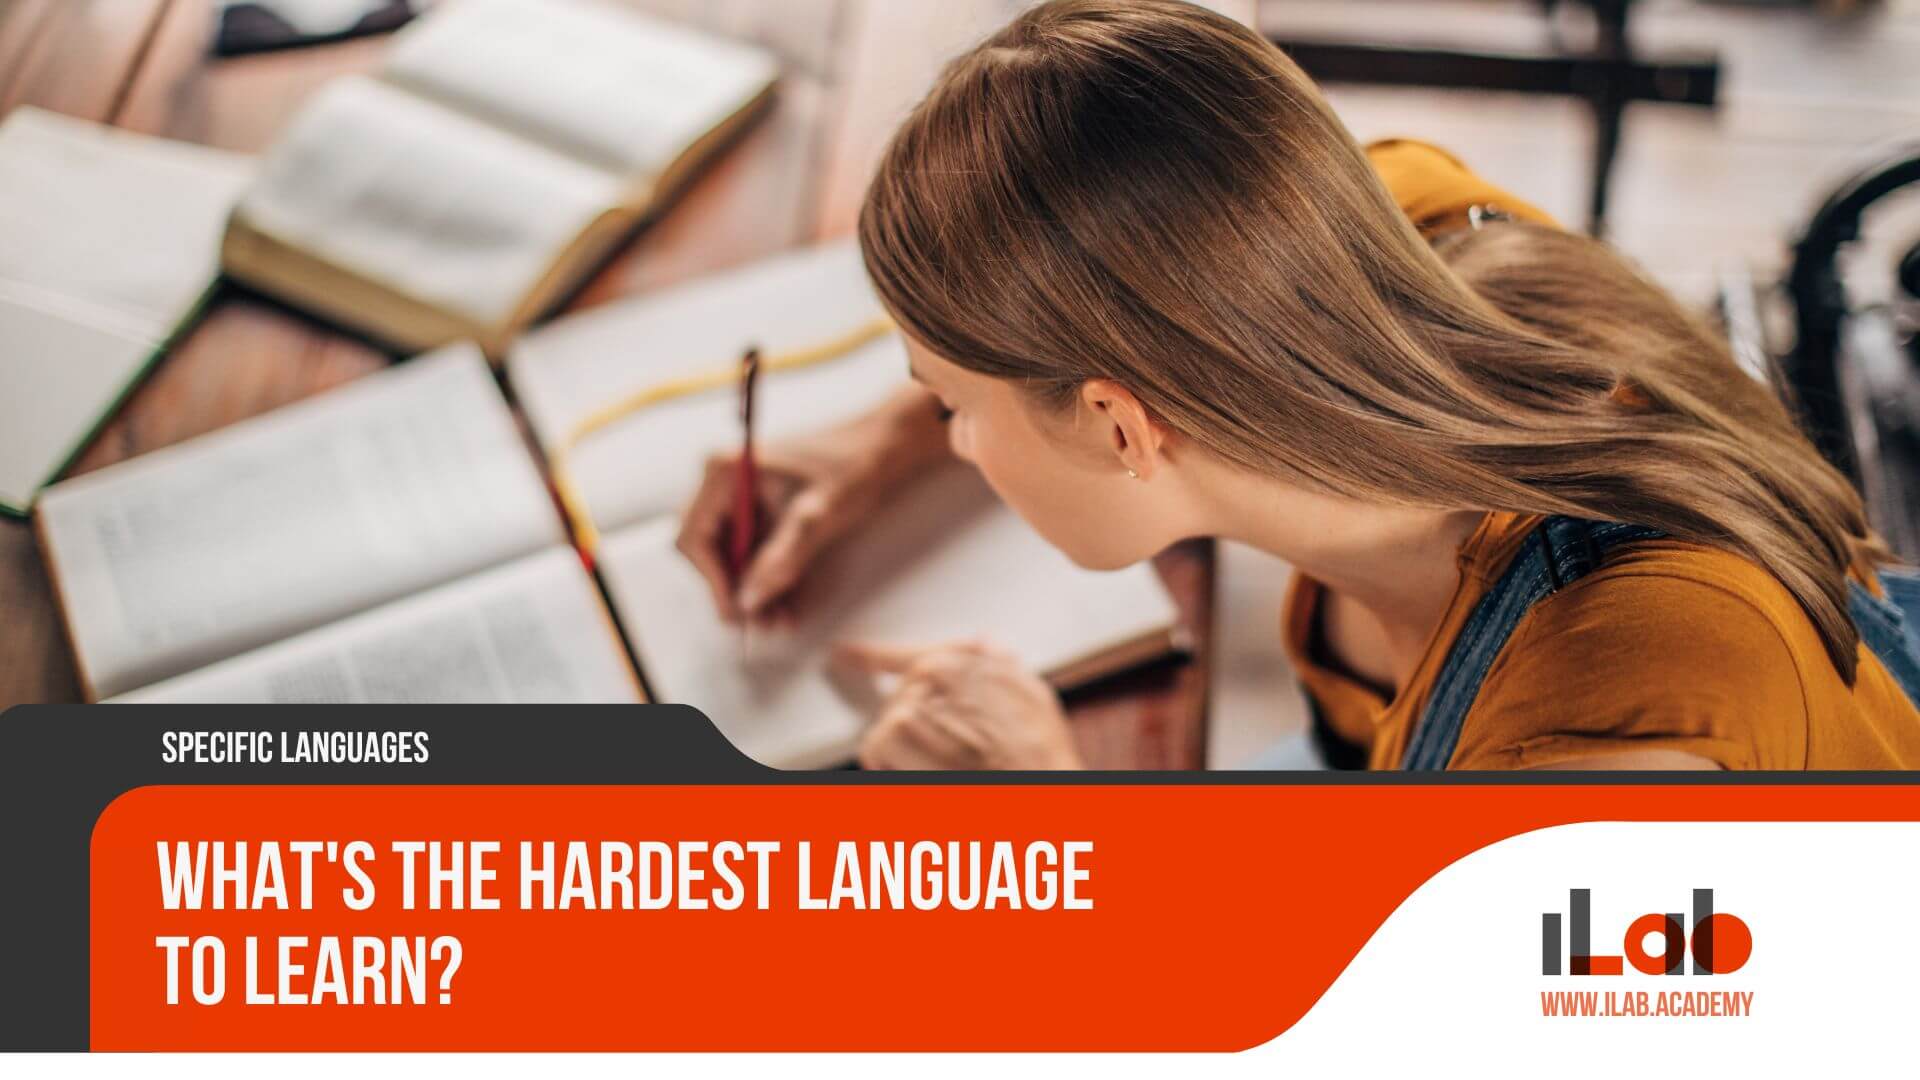 What's the Hardest Language to Learn?